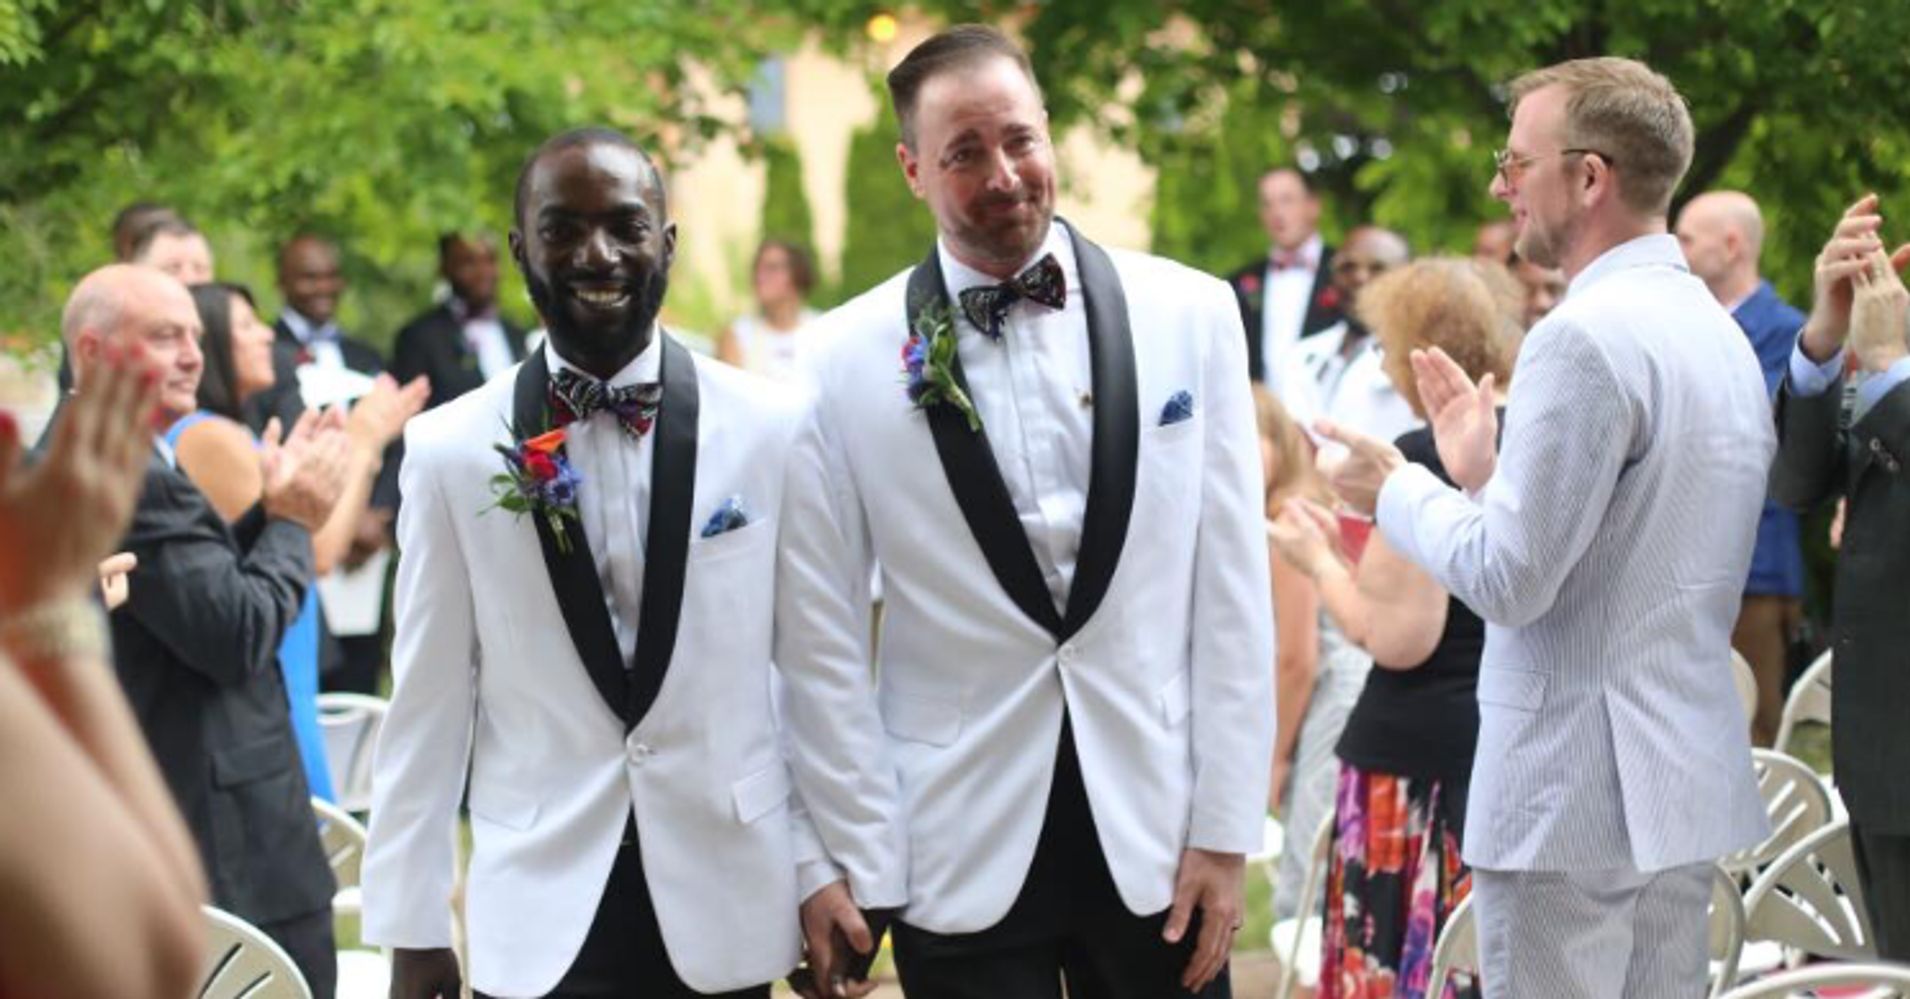 The Gay Marriage That Broke The Nigerian Internet | HuffPost